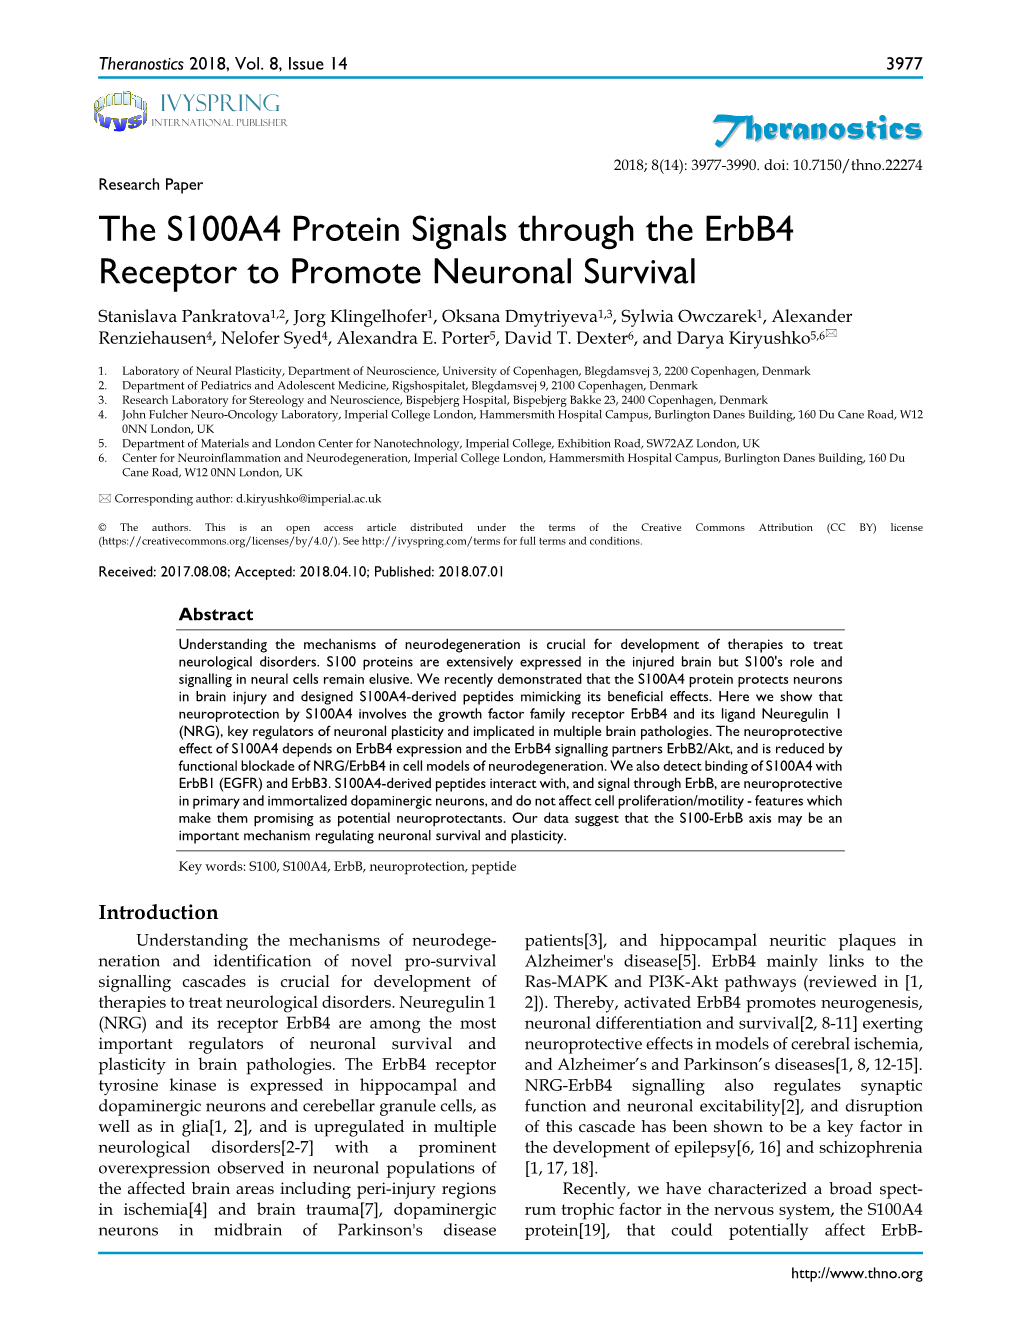 Theranostics the S100A4 Protein Signals Through the Erbb4